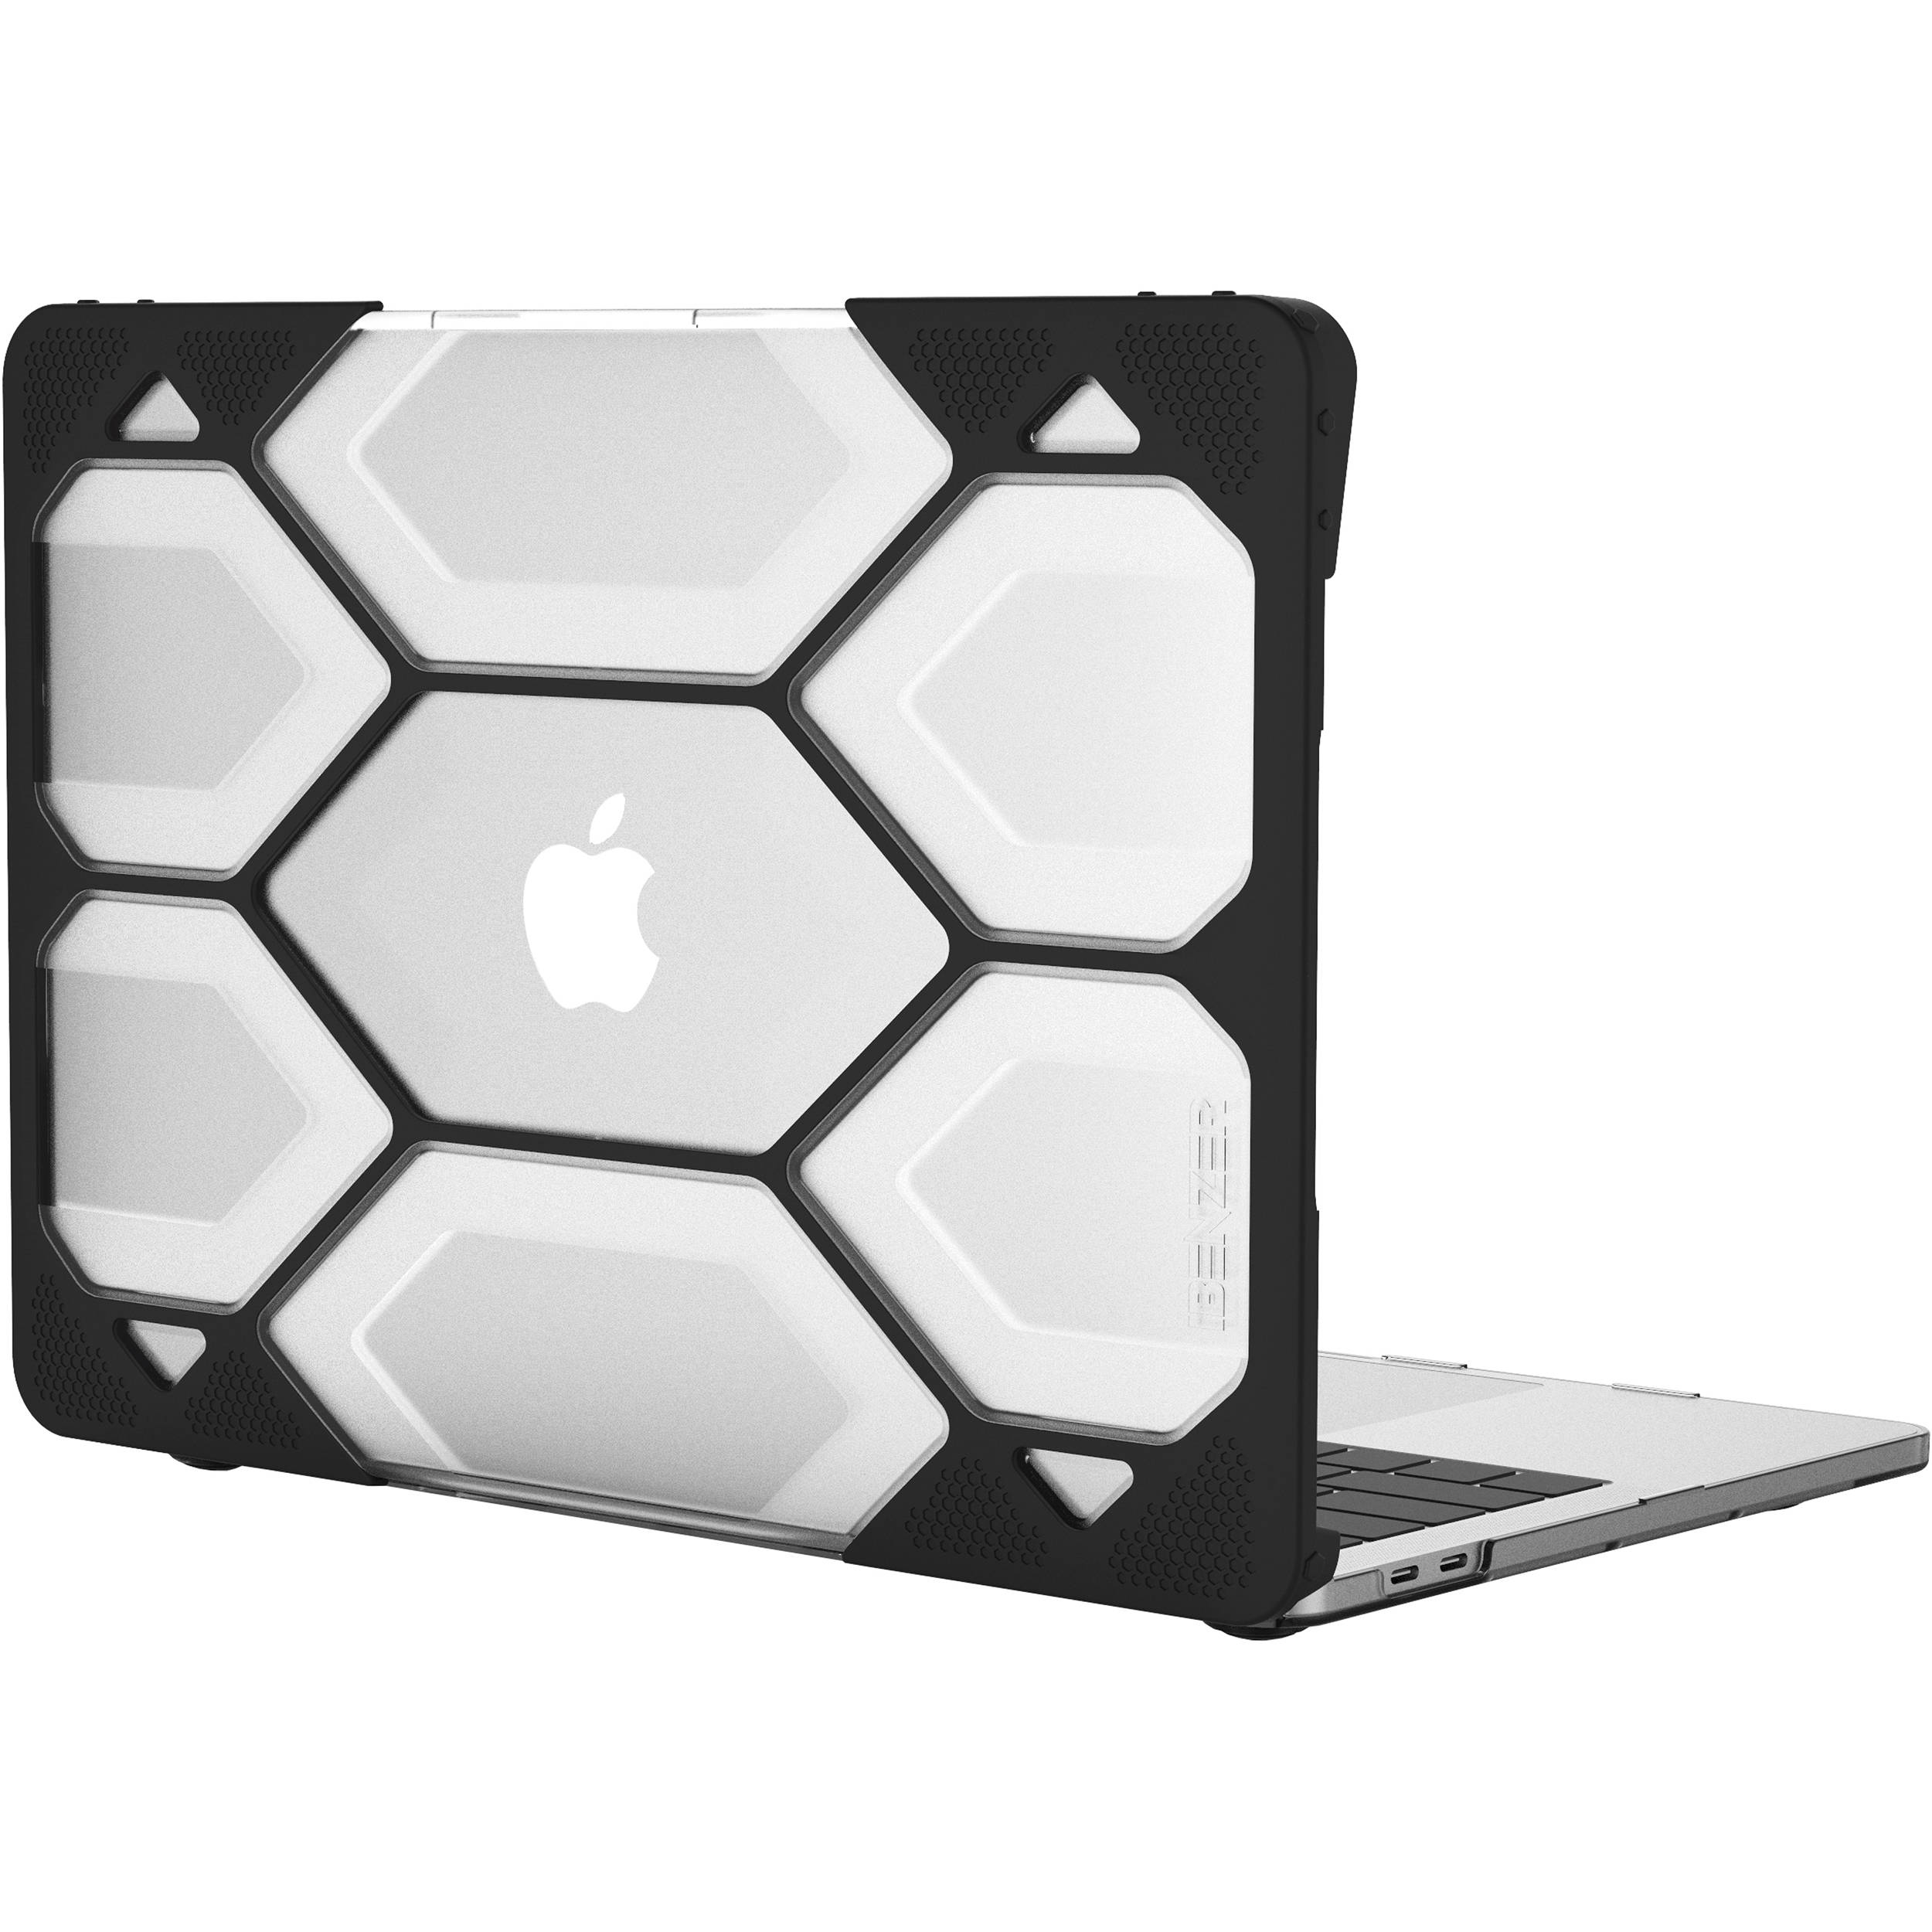 iBenzer Hexpact Case for MacBook Pro Retina 13 (Touch & Non-Touch Bar, Clear)